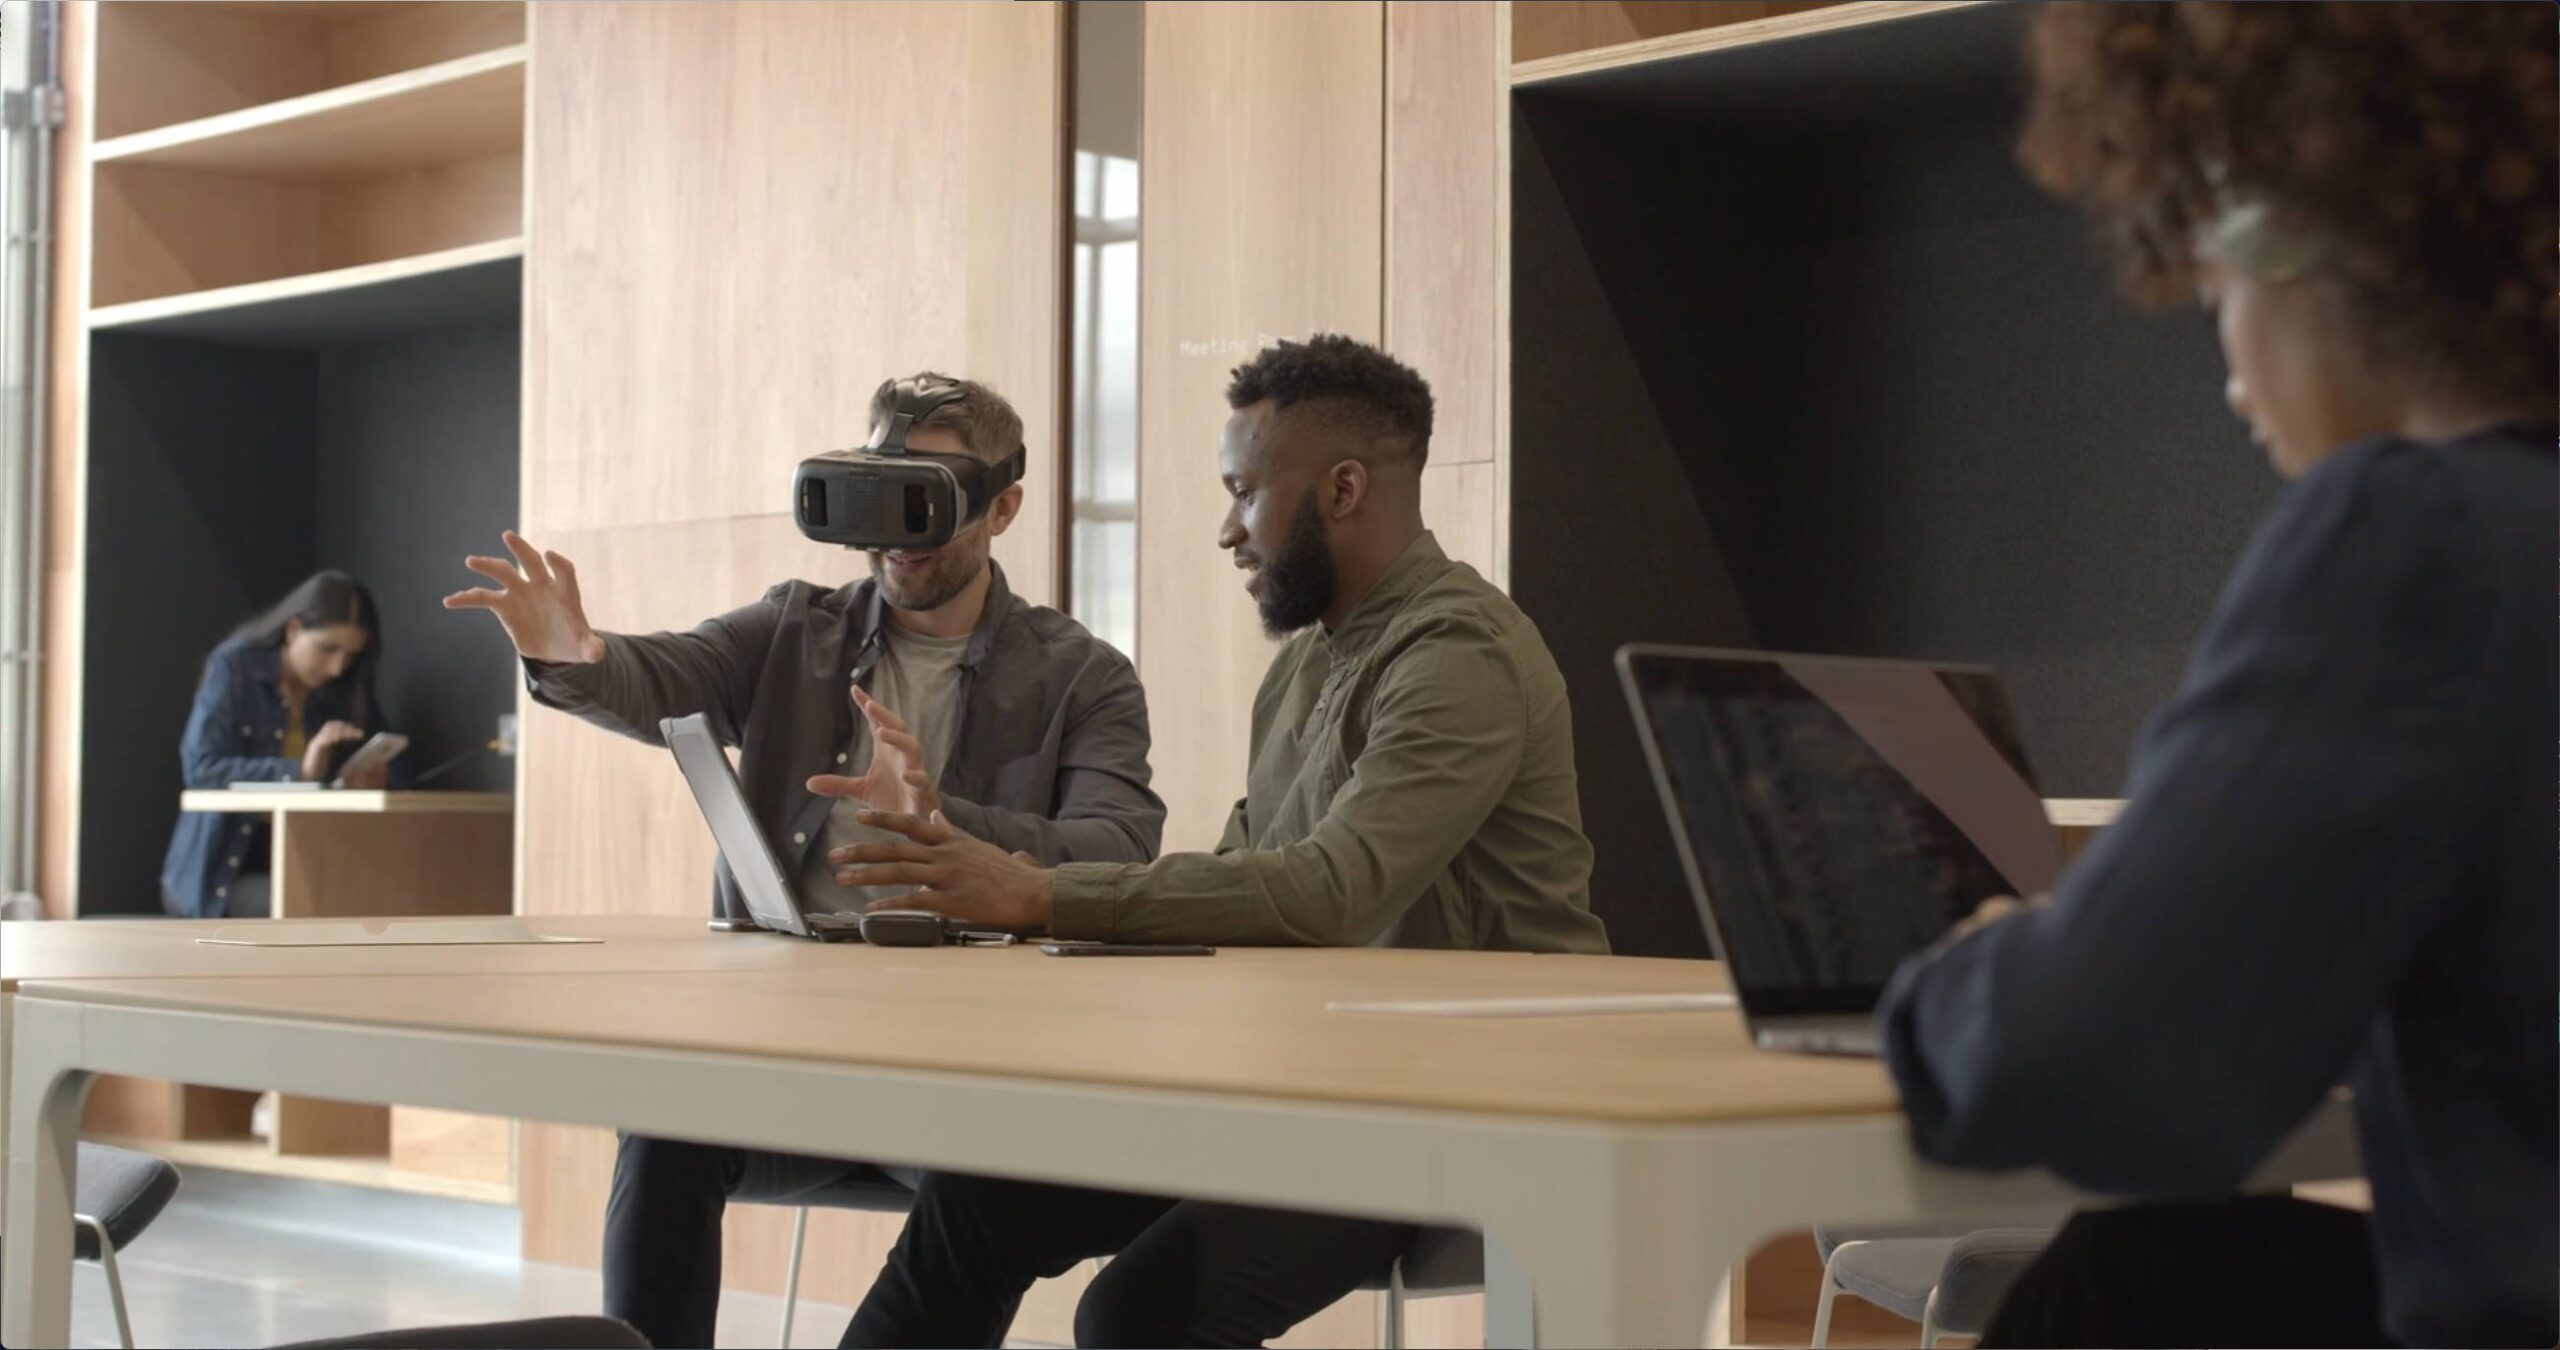 men sitting at table with laptop and vr headset | Lumira Studio Video Production Hertfordshire